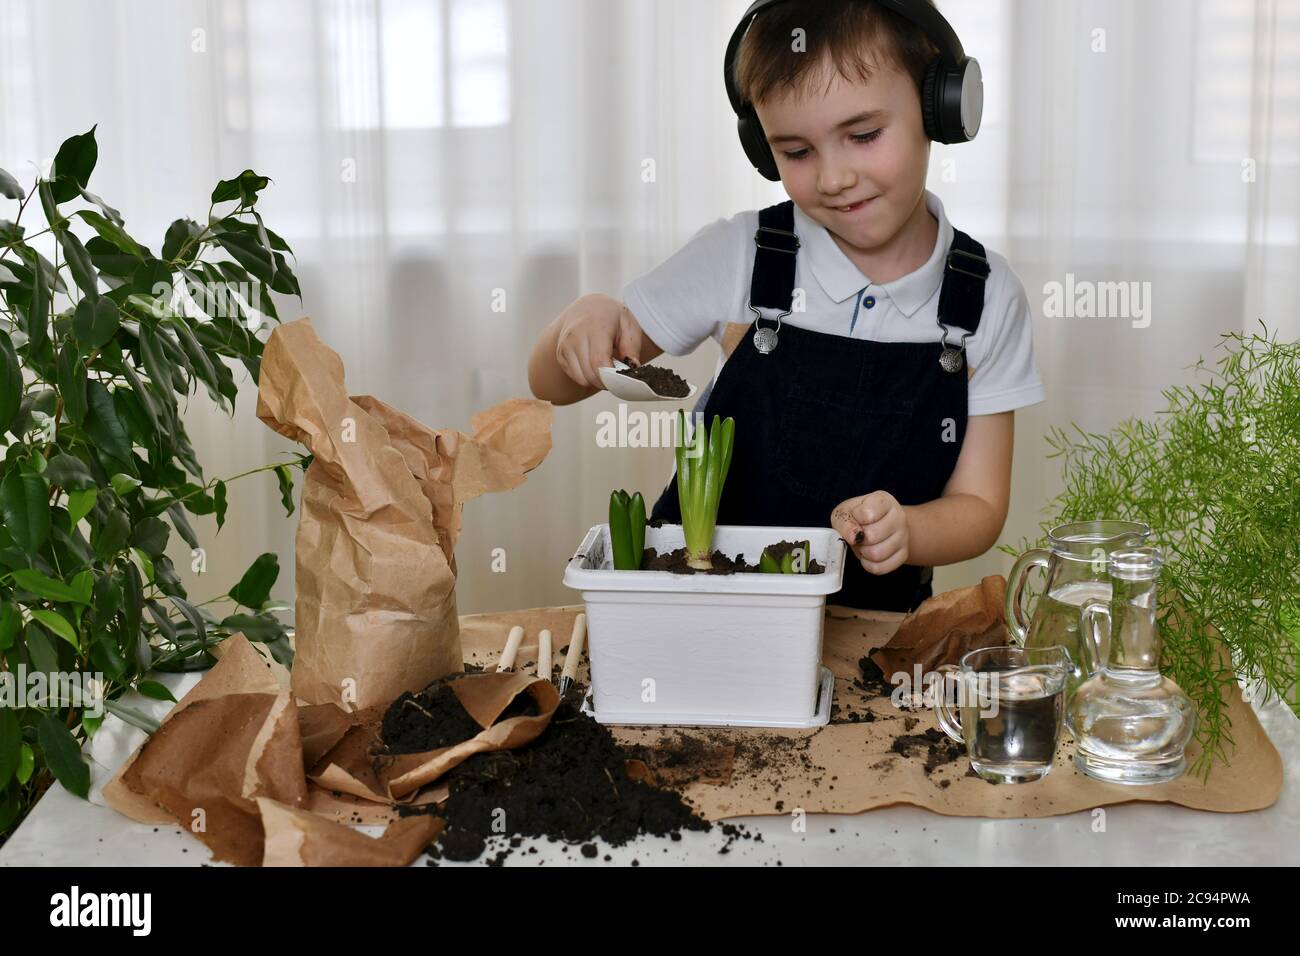 The kid imagines, dances and transfers the soil from the package to a container with bulbs of hyacinth flowers. Stock Photo